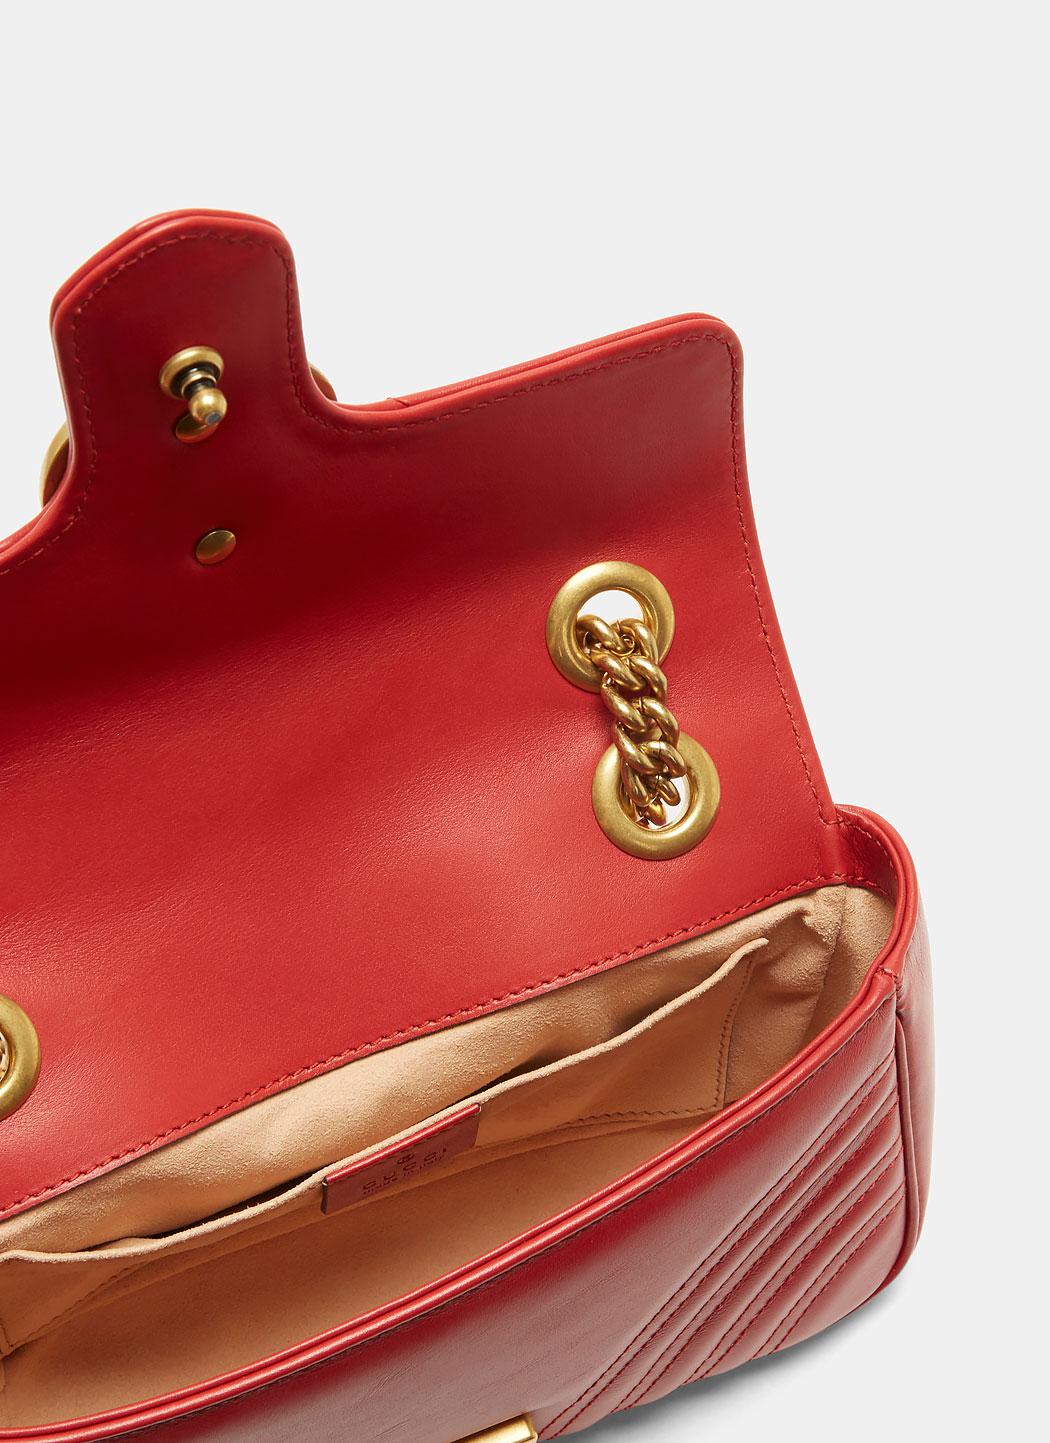 Gucci Leather Gg Marmont Matelassé Mini Chain Shoulder Bag In Red - Lyst